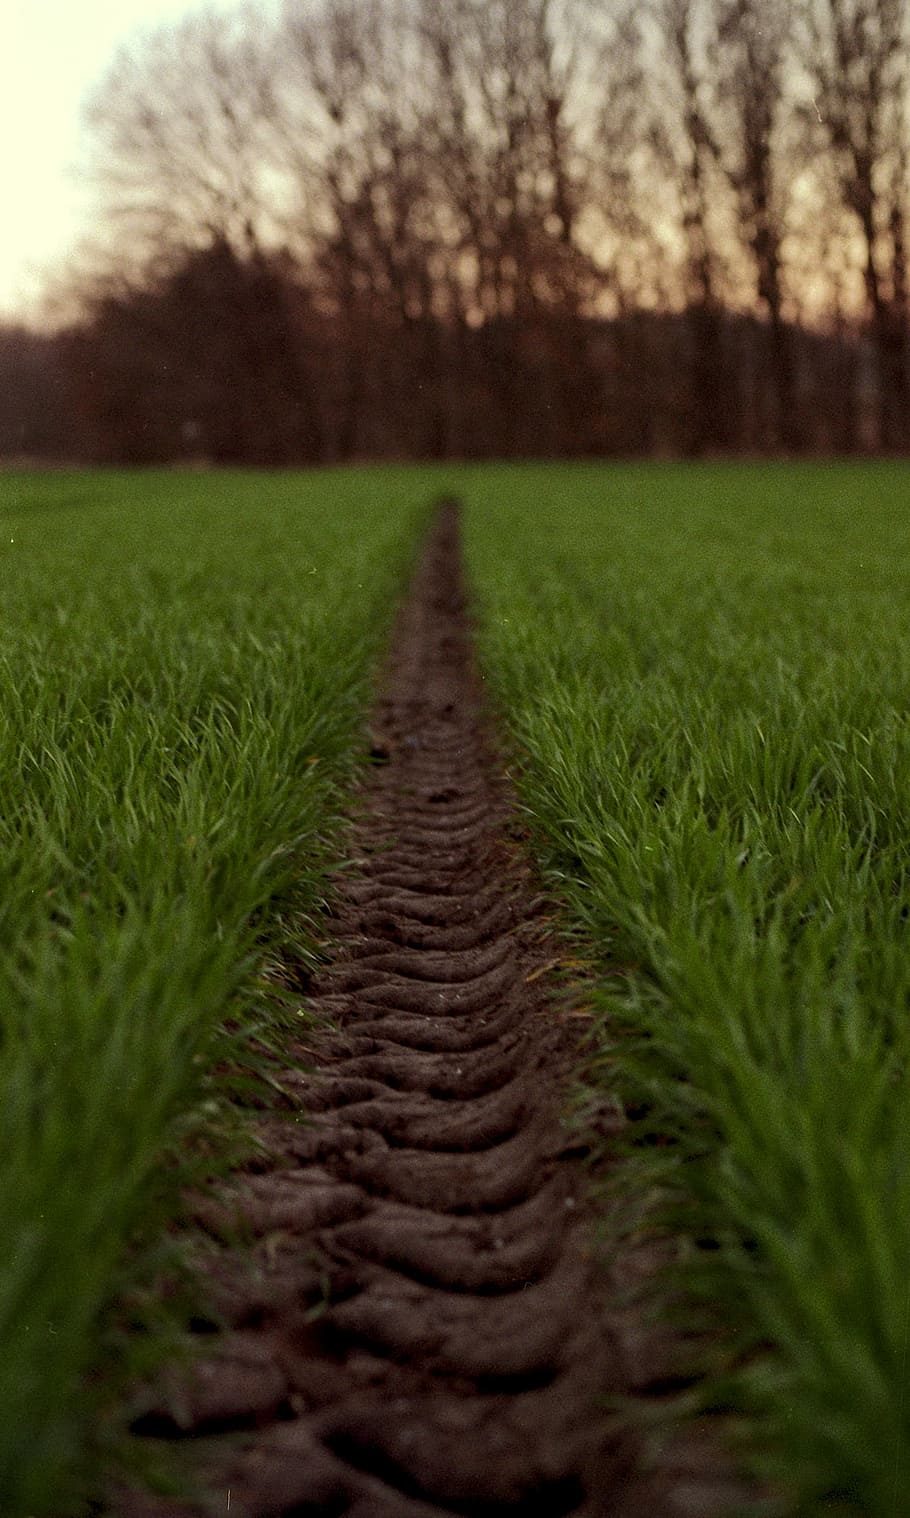 Tire, Path, Green, Wheat, tire path, green, wheat, track, road, countryside, summer